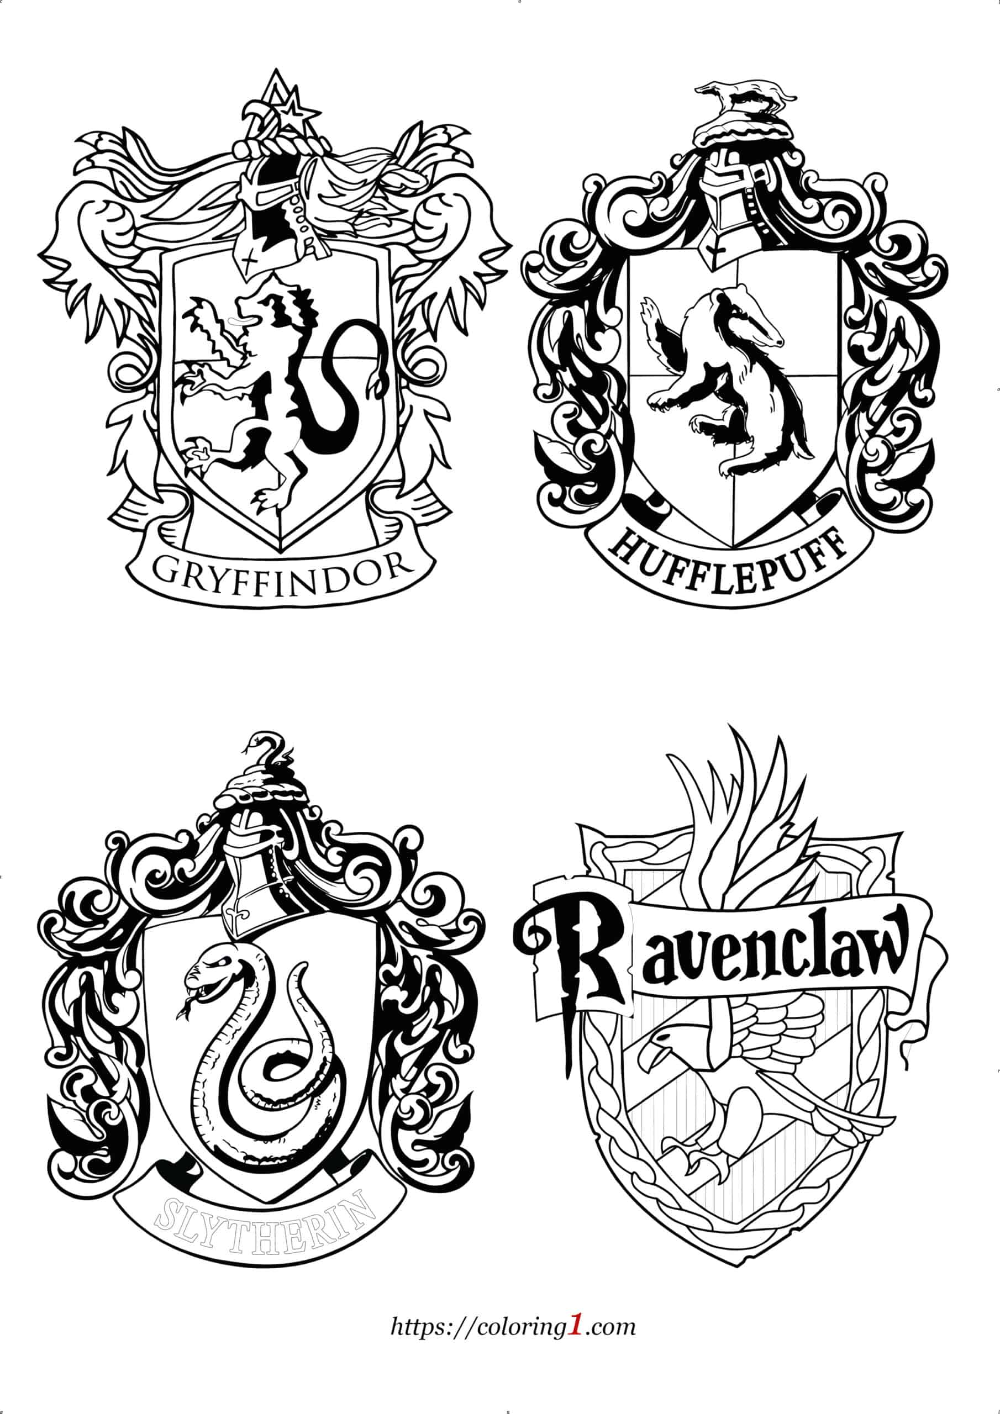 Harry Potter House Crests Coloring Pages 2 Free Coloring Sheets 2021 Harry Potter Coloring Pages Harry Potter Colors Harry Potter Coloring Book